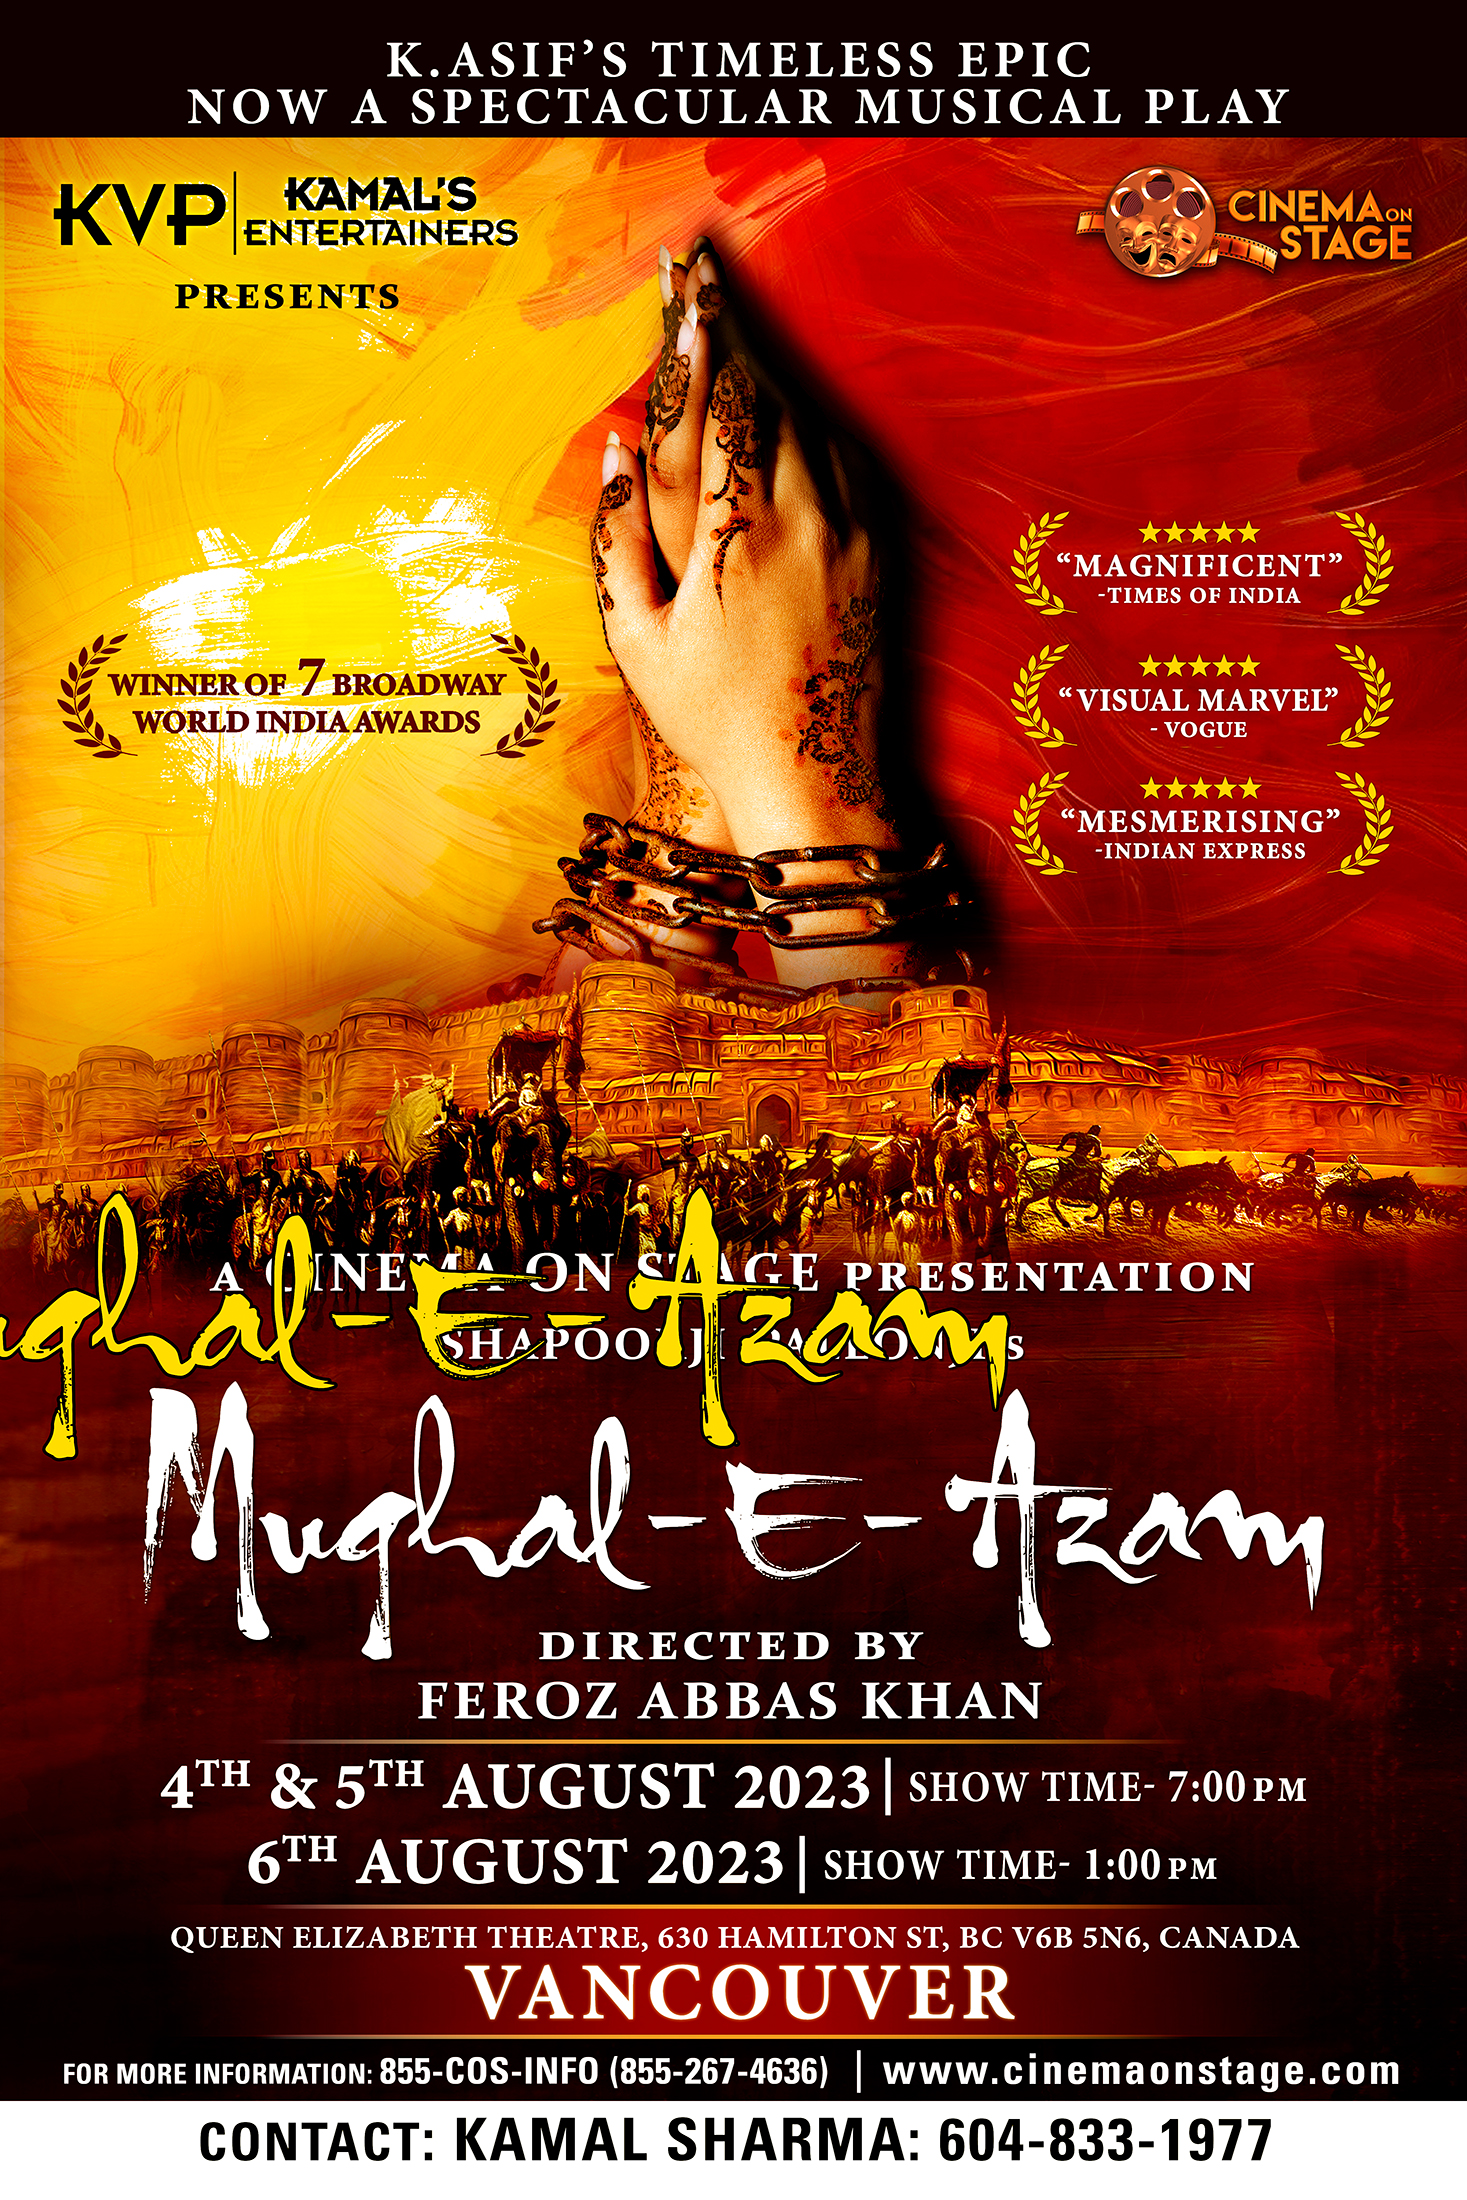 Is Vancouver Ready For Dazzling Mughal-E-Azam The Musical On August 4-6th